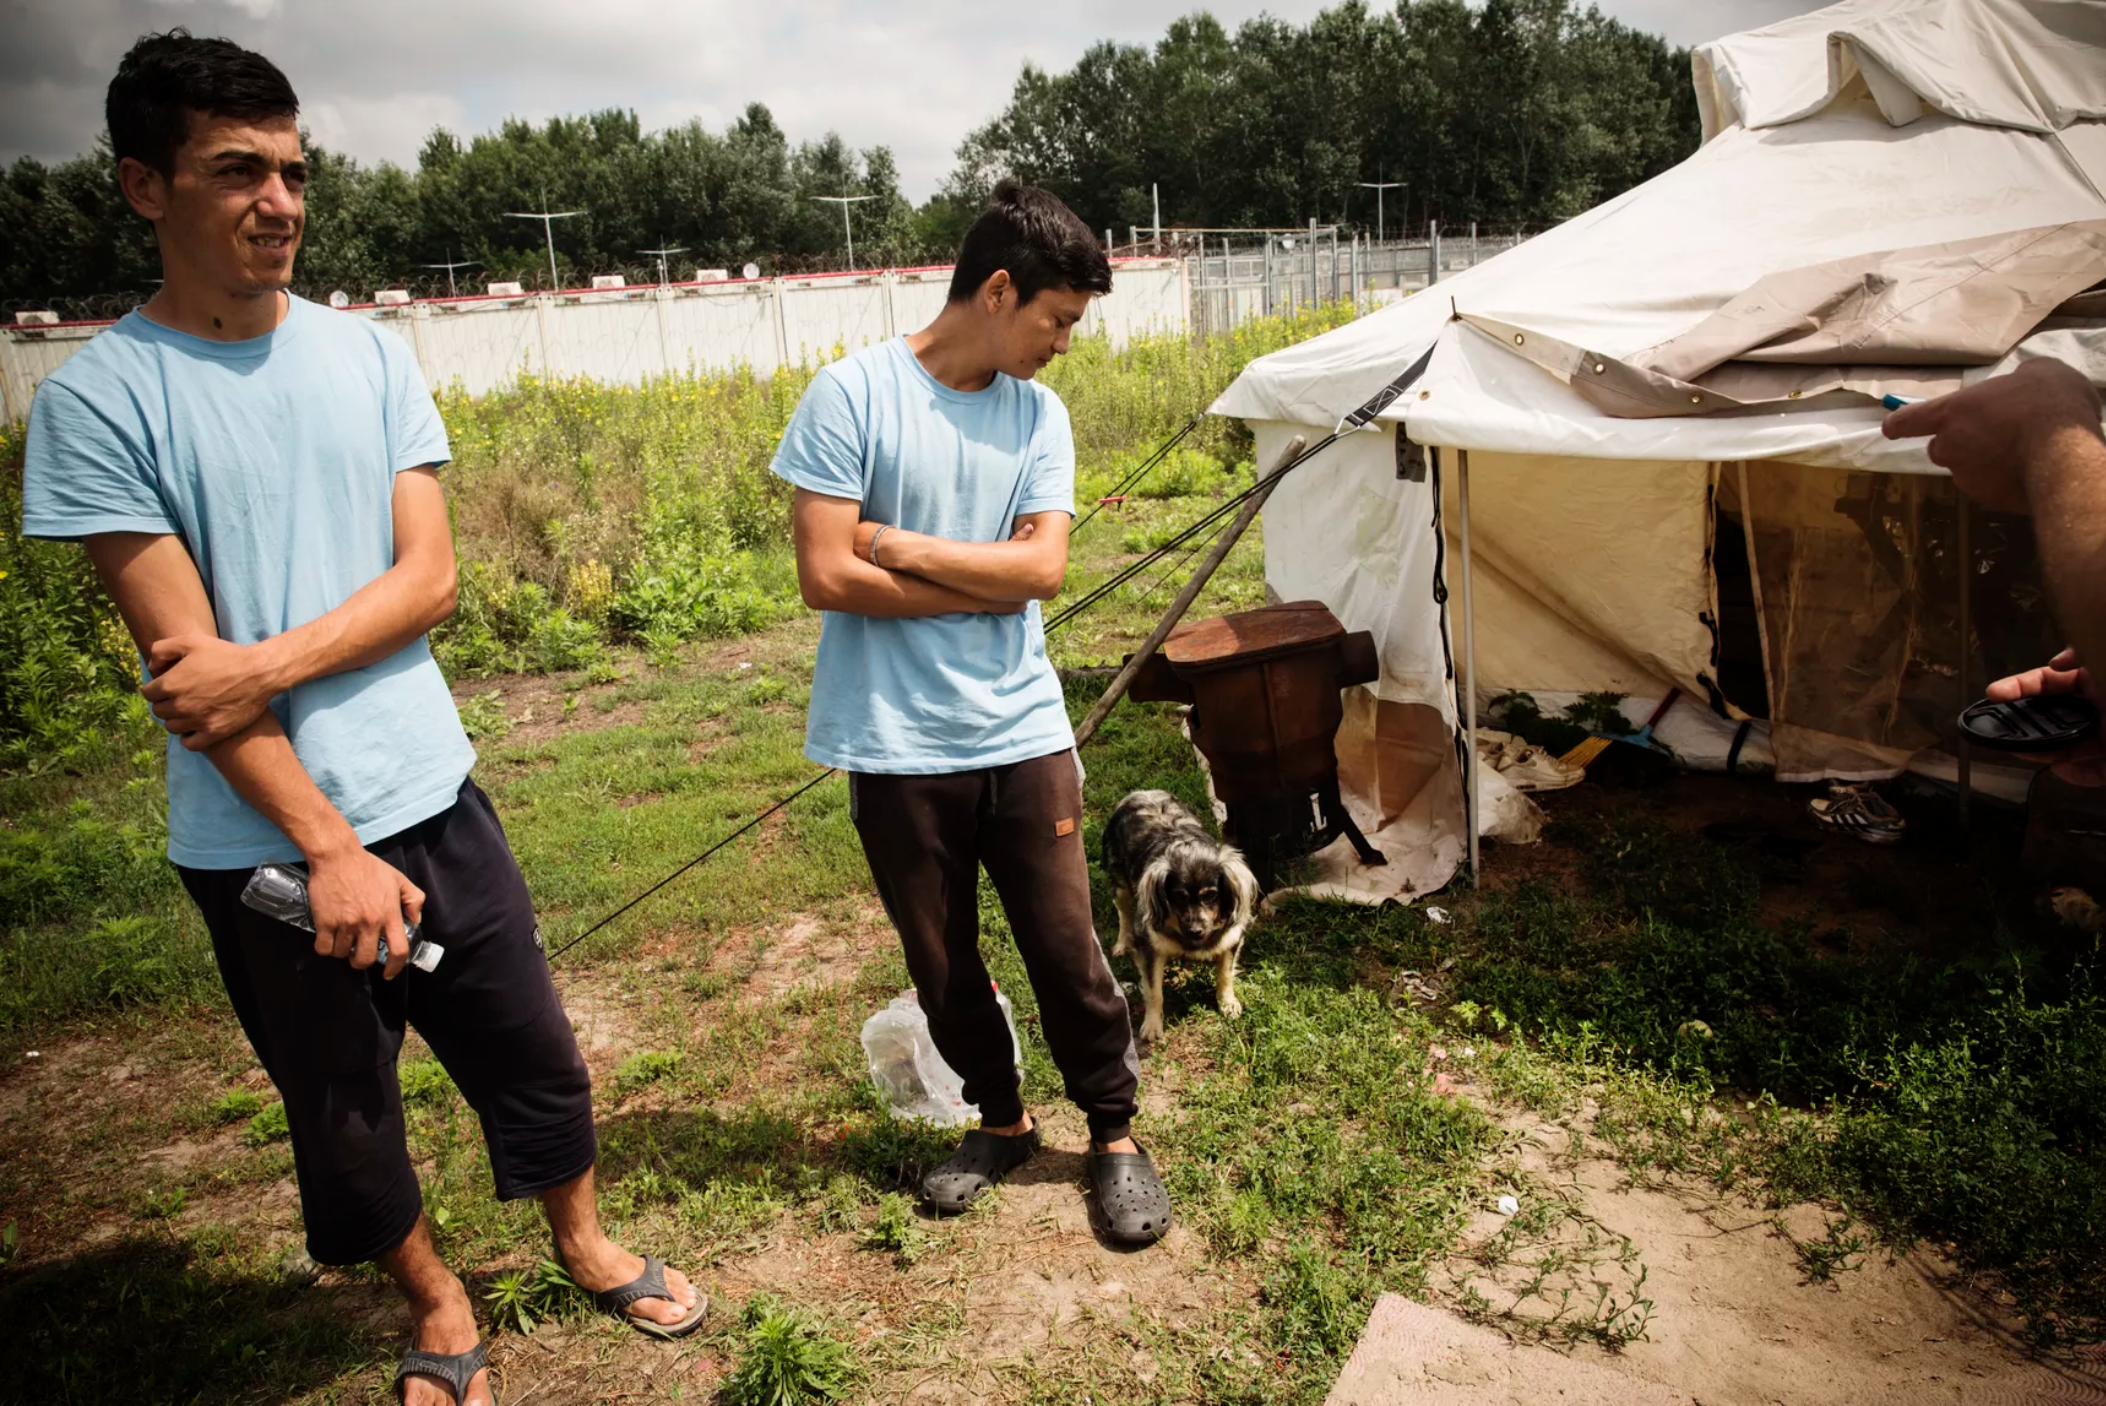 Hashmat (L) and Faiz outside their living quarters in June. Image by Zack Beauchamp for Vox. Hungary, 2018.